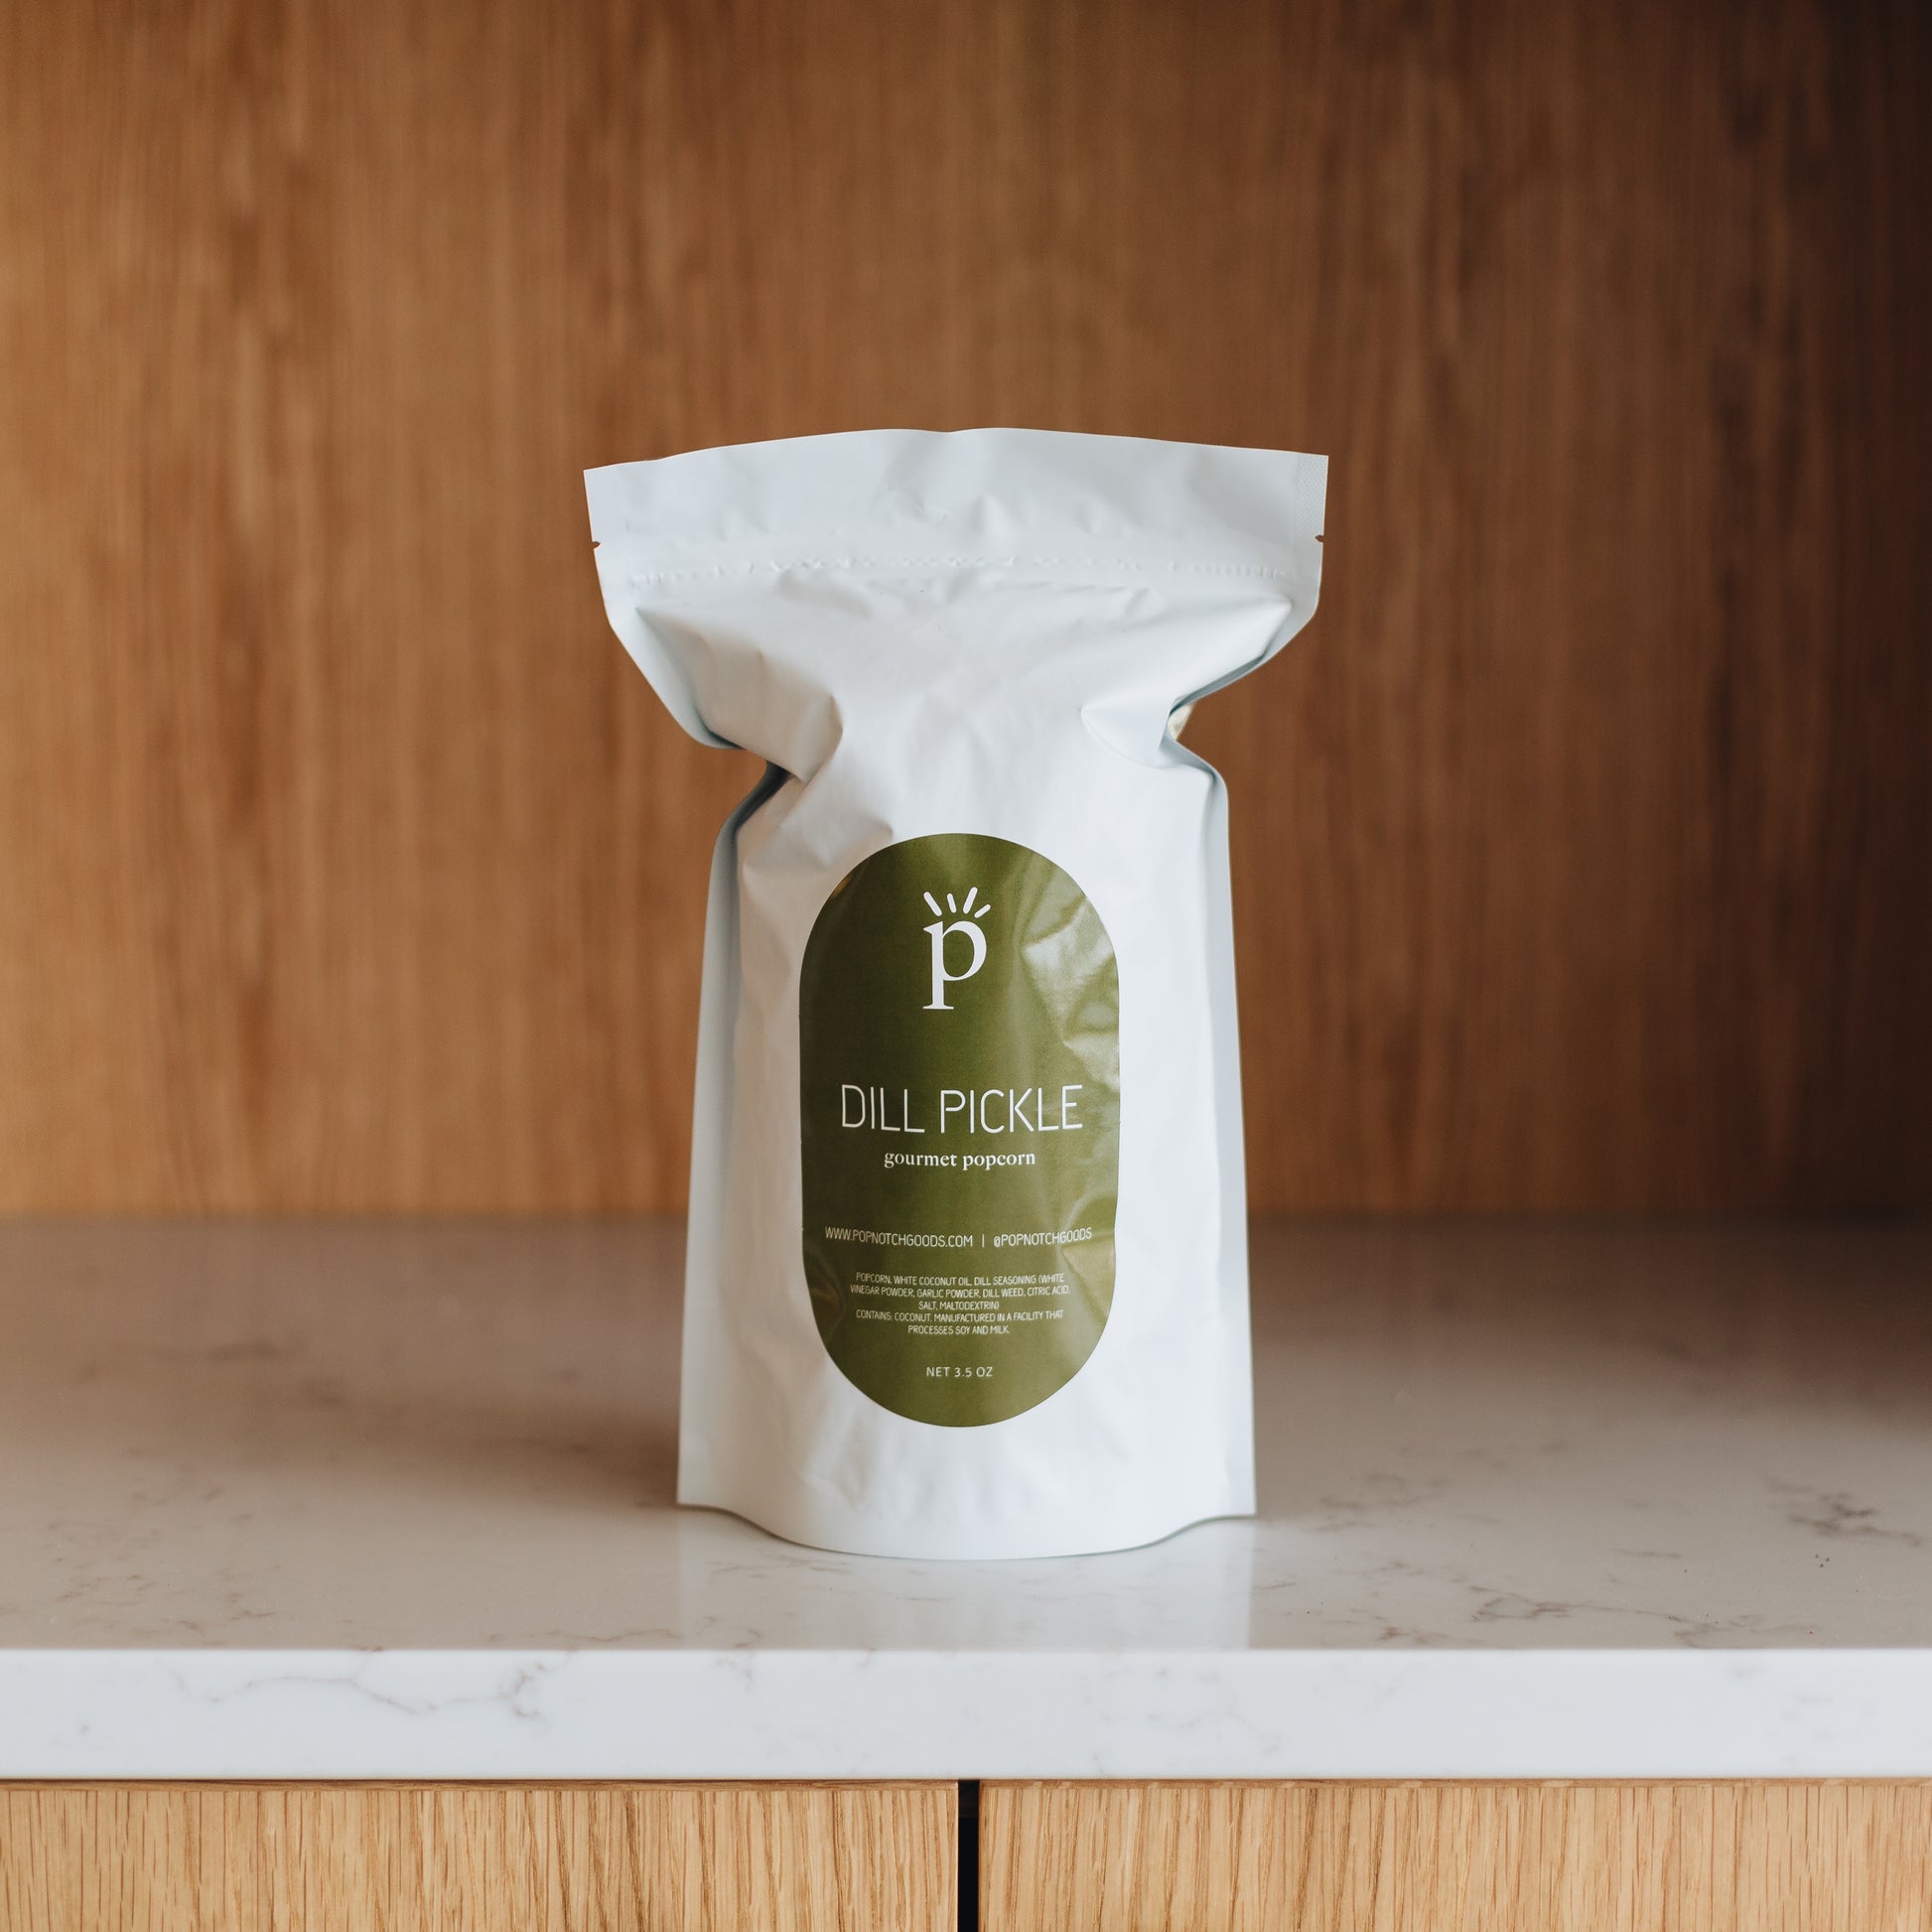 A perfectly seasoned Dill Pickle popcorn. A combination of salt and vinegar with a hint of Dill satisfies all your salty popcorn needs. Pick up a bag at Popnotch Goods or order online now to enjoy this uniquely flavored popcorn! Featured is our Large Bag (3.5oz).